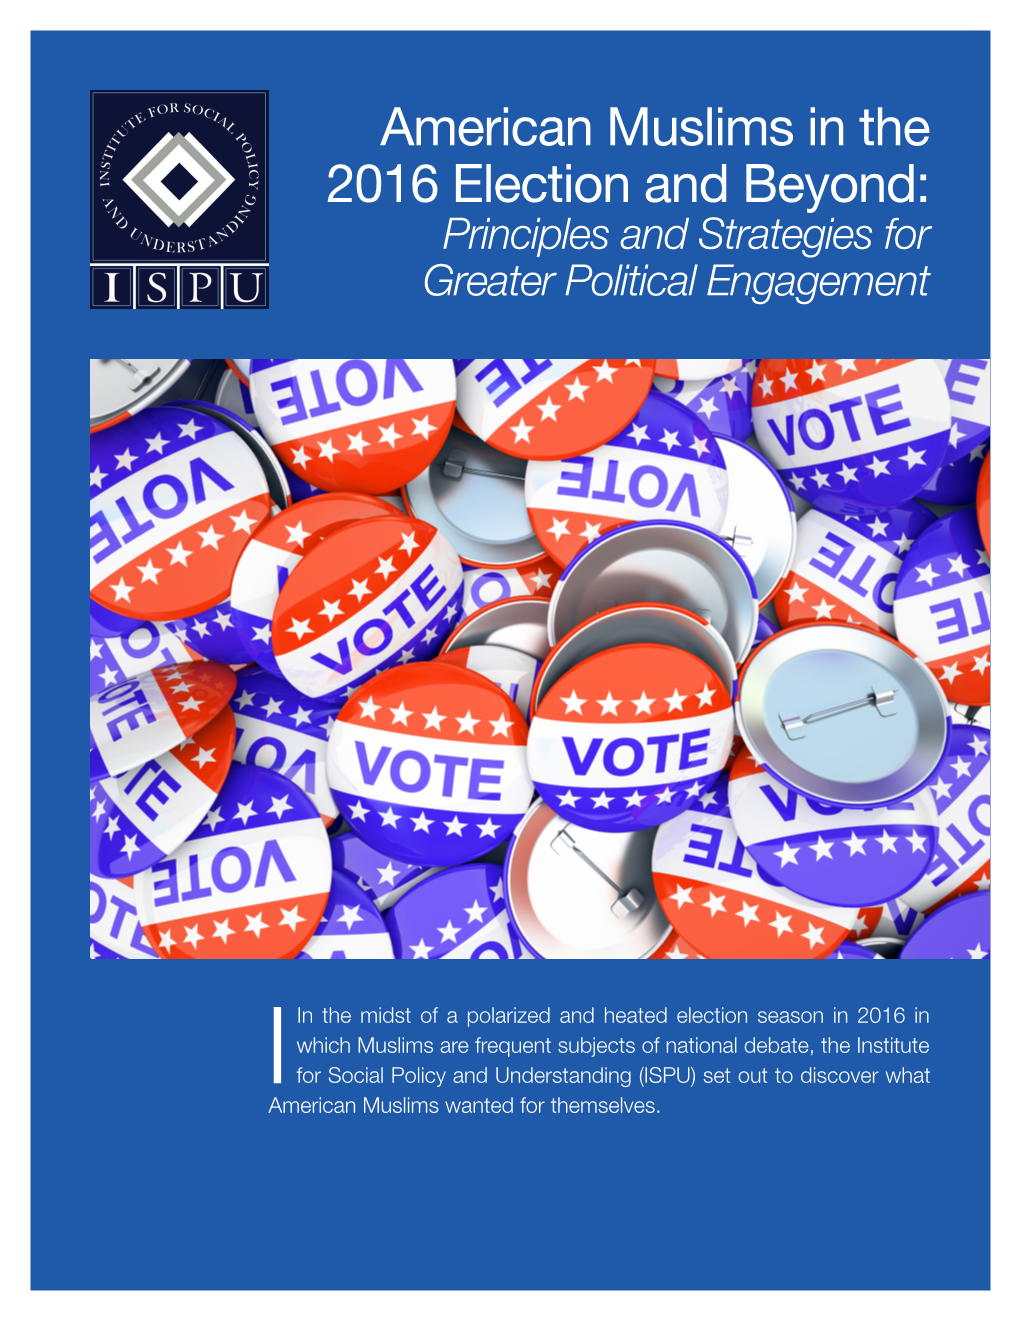 American Muslims in the 2016 Election and Beyond: Principles and Strategies for Greater Political Engagement